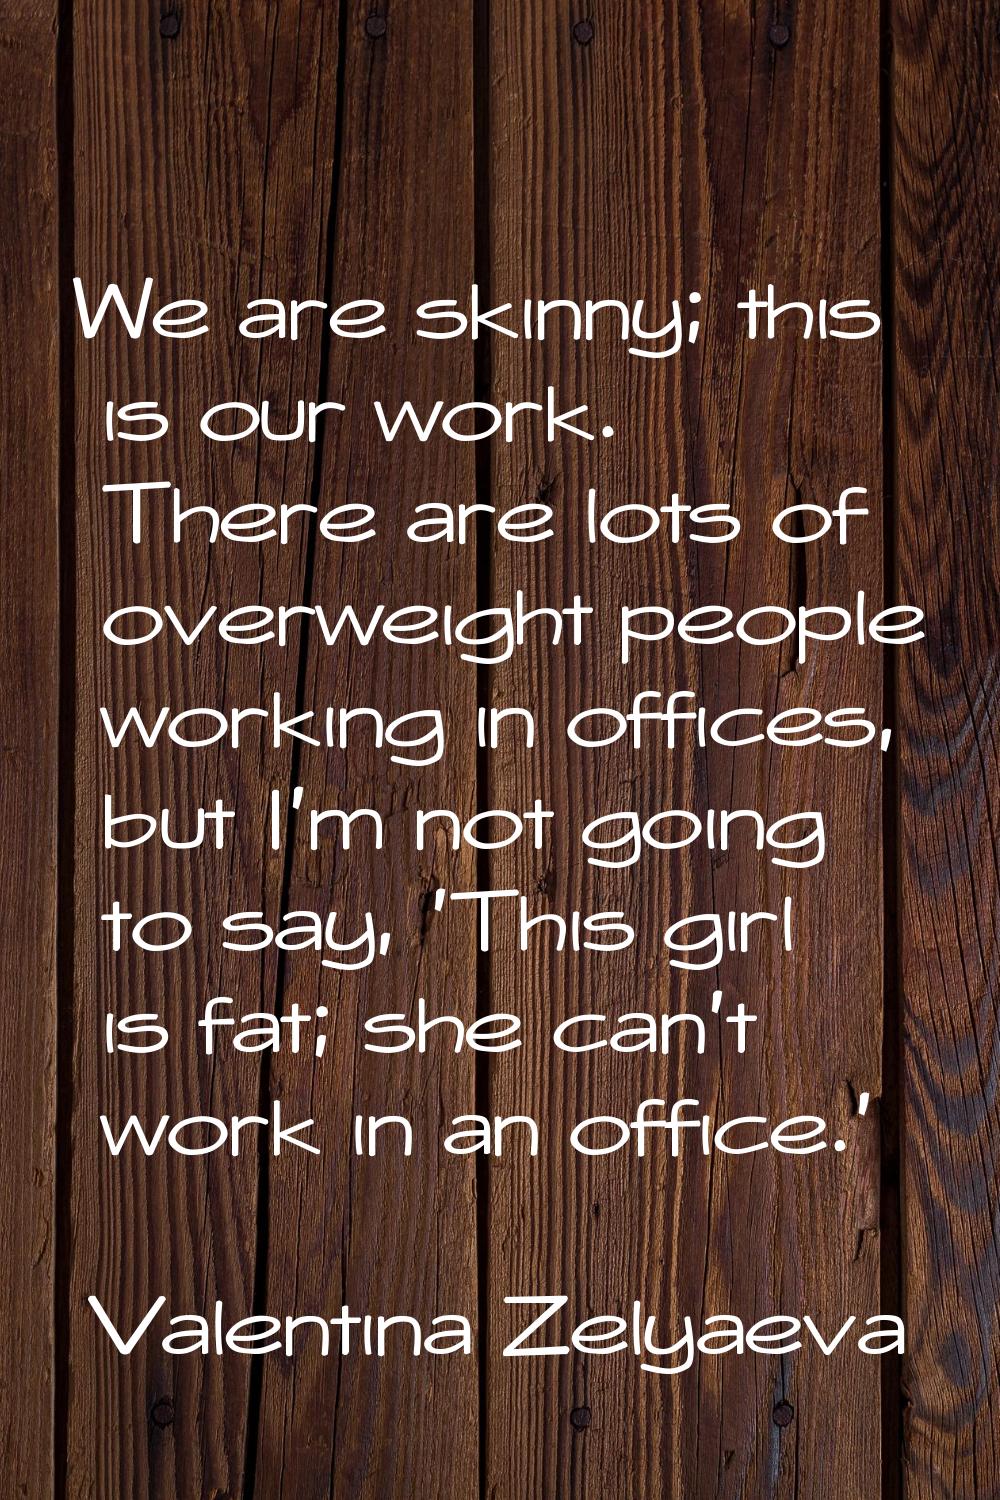 We are skinny; this is our work. There are lots of overweight people working in offices, but I'm no